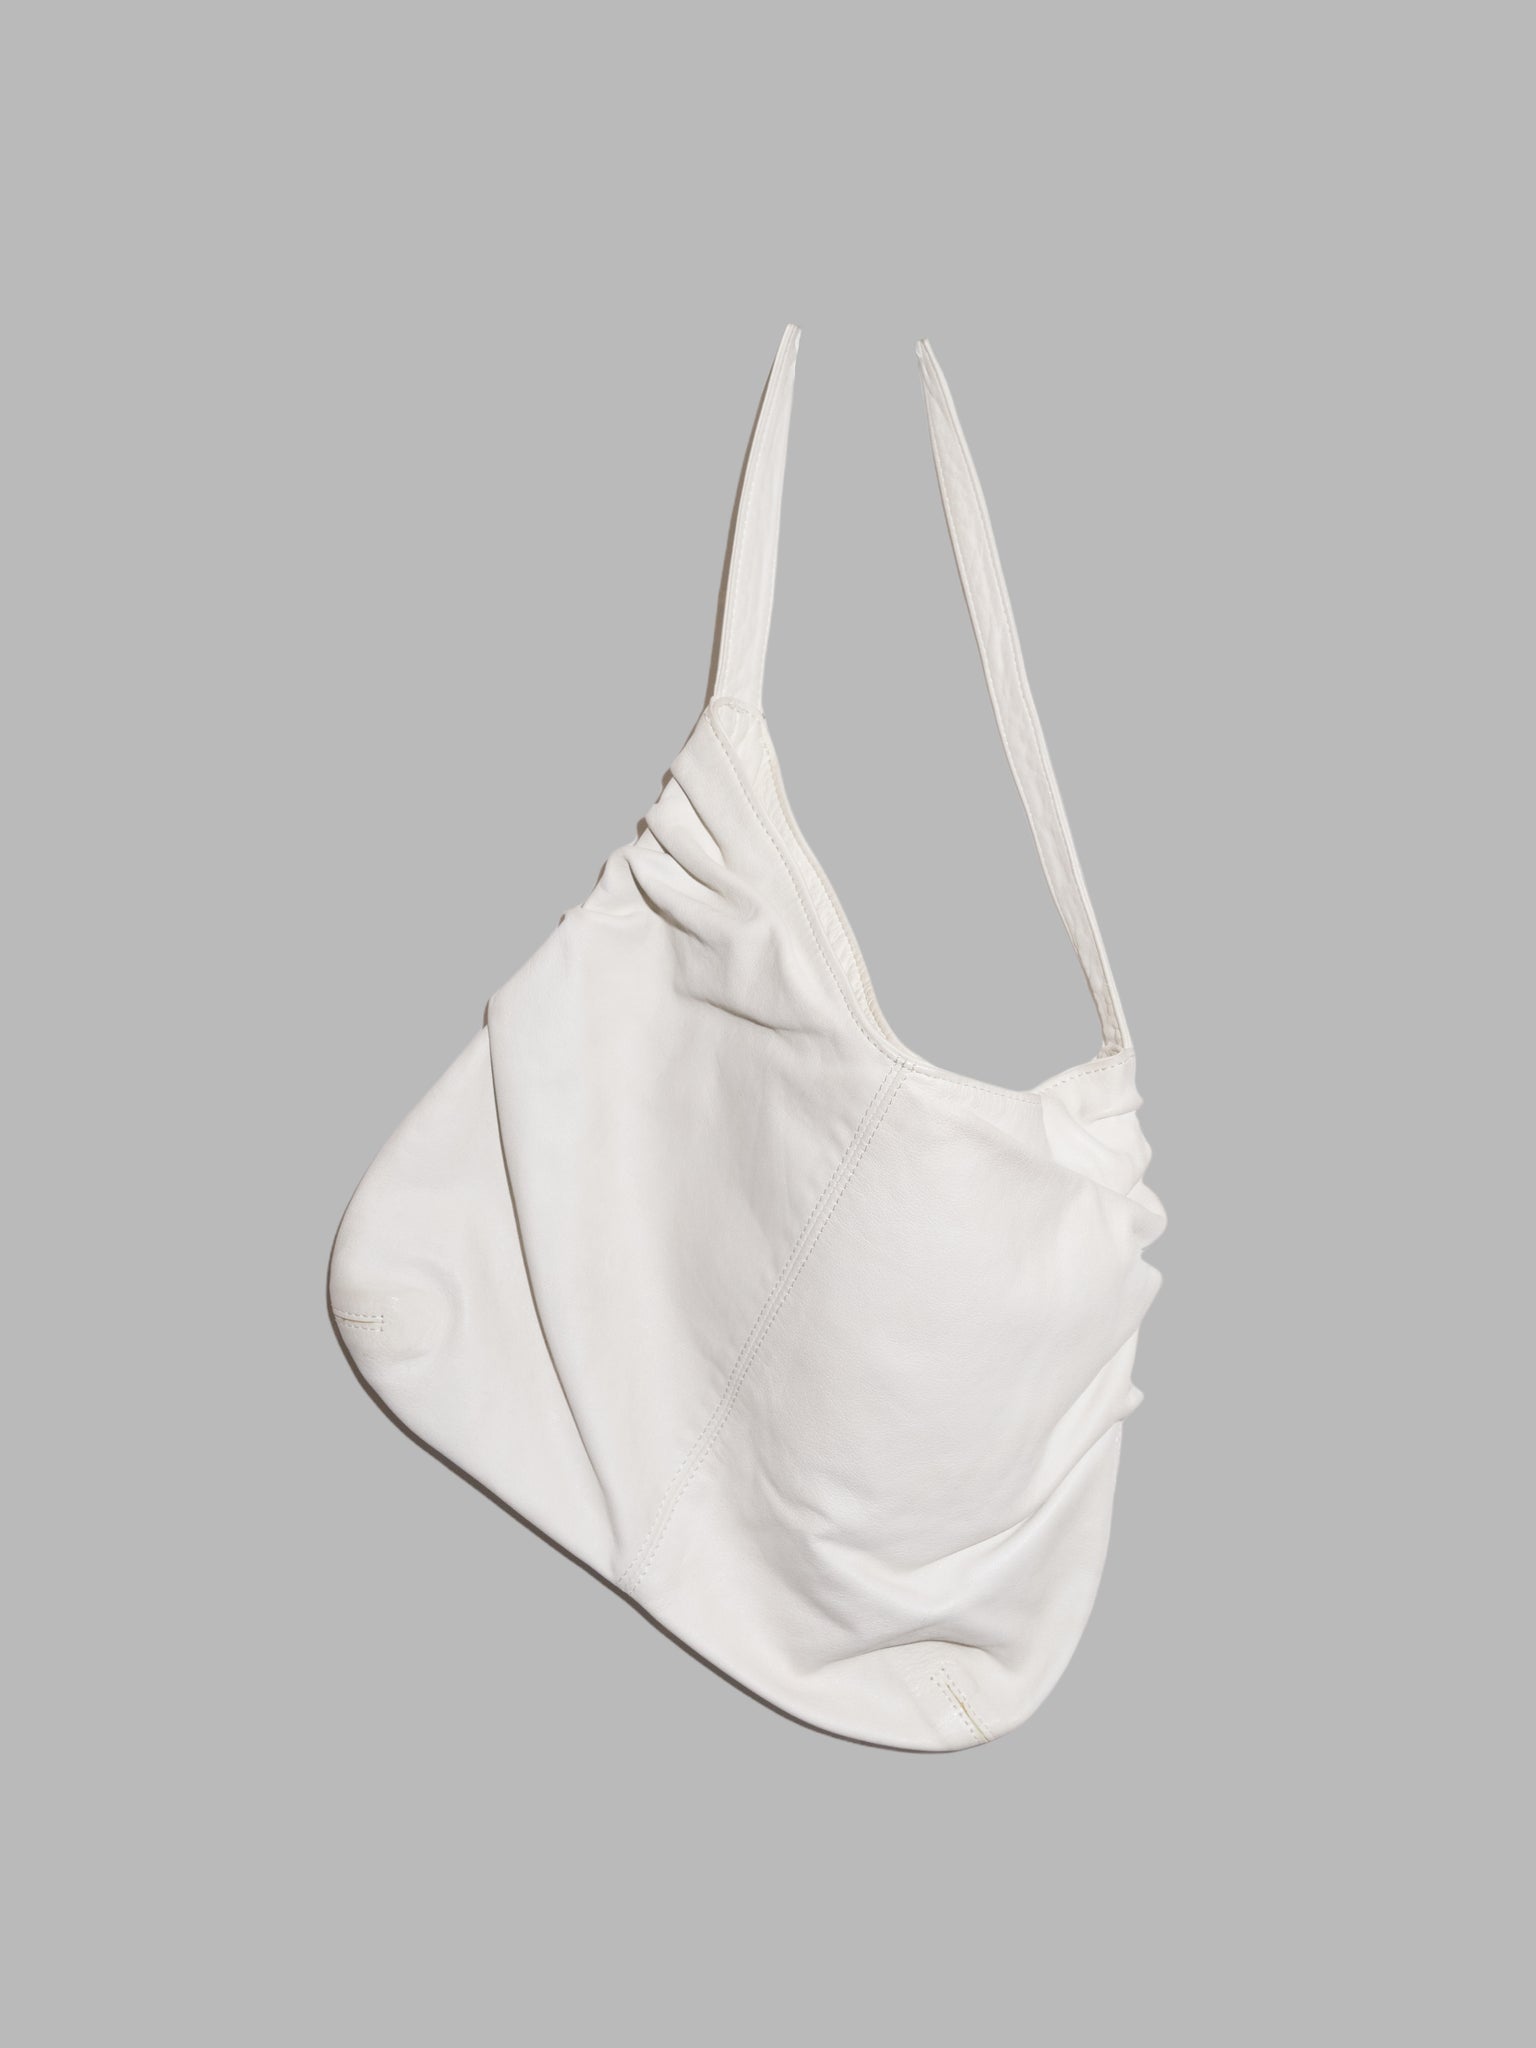 Jean Colonna off white leather shoulder bag with gathered sections